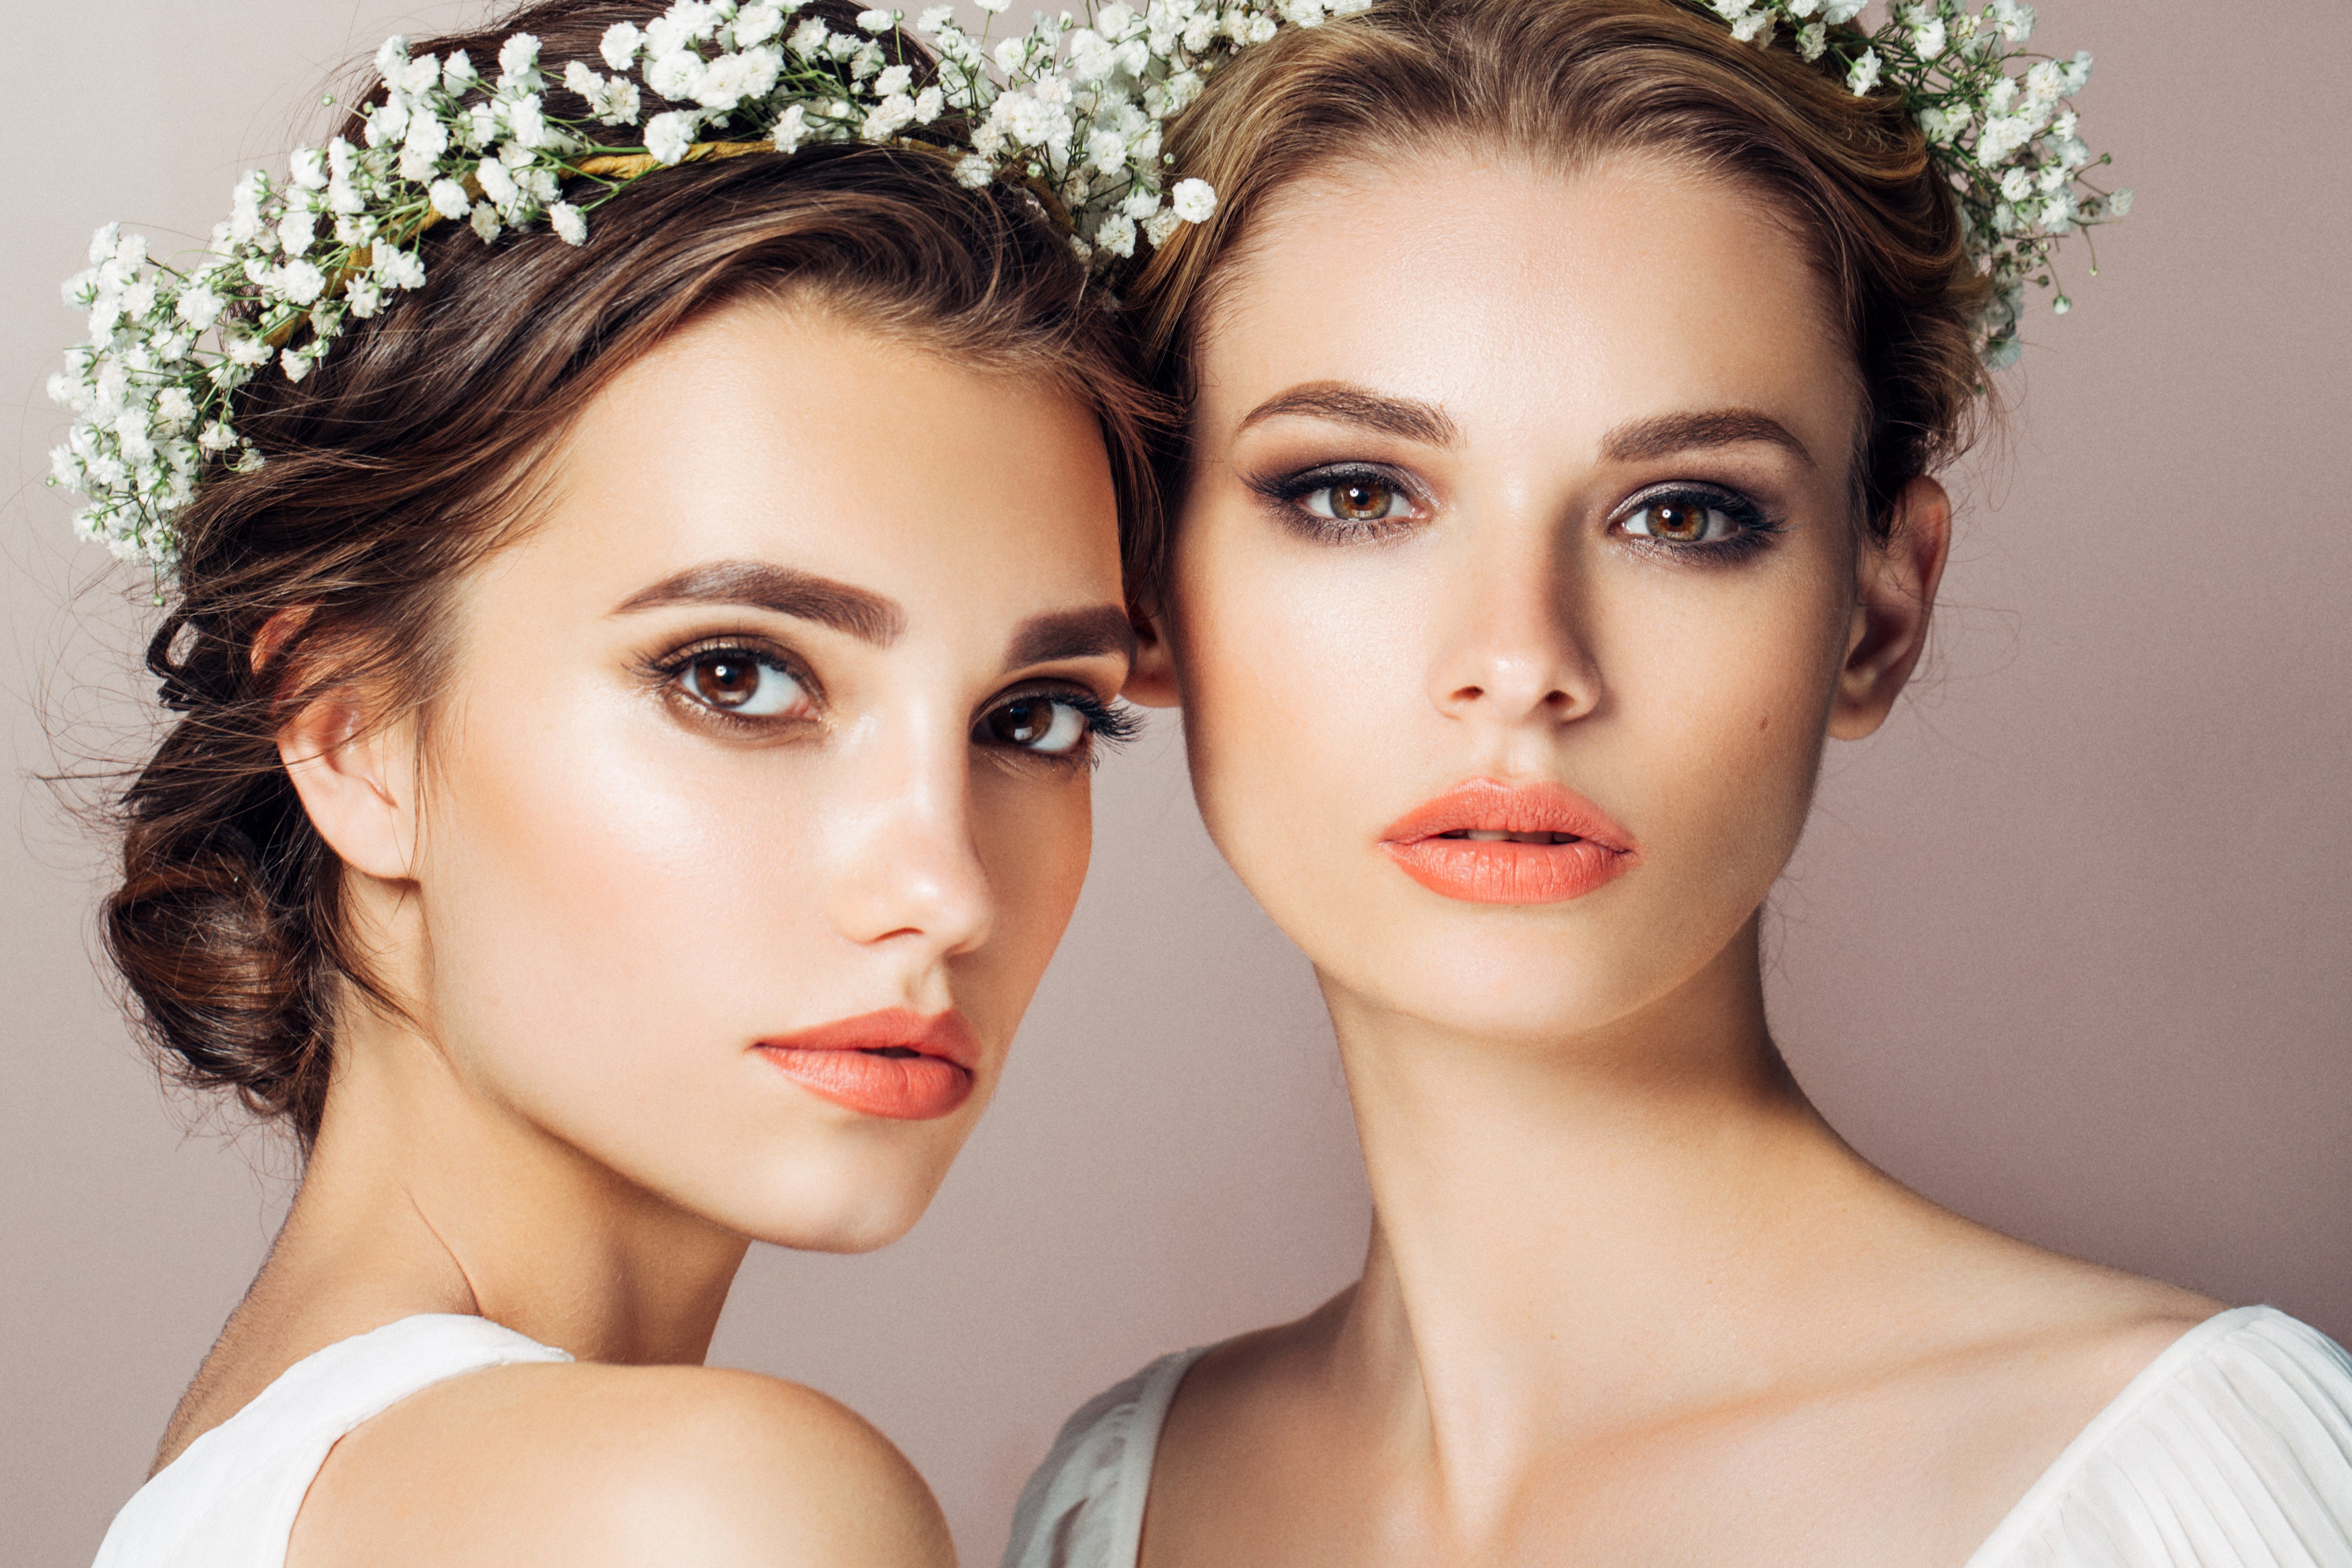 Makeup for weddings? Get the perfect look!